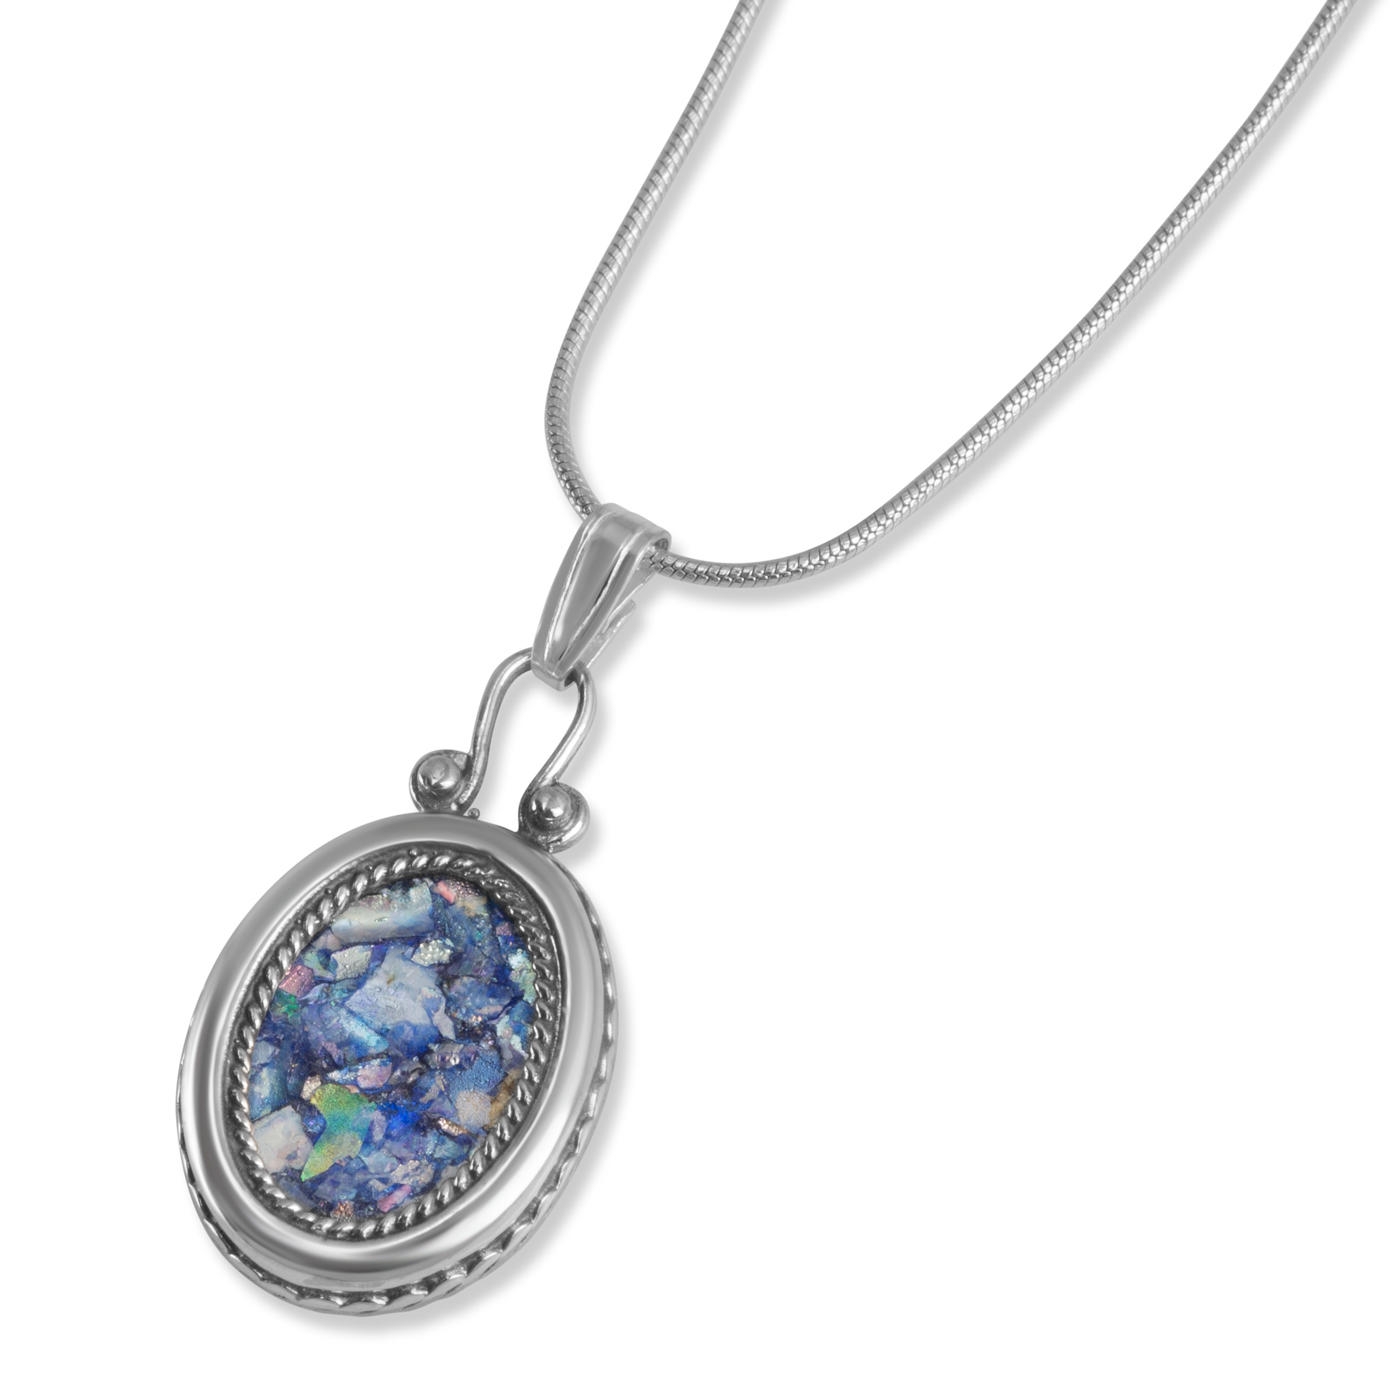 925 Sterling Silver and Roman Glass Oval Necklace with Filigree Frame - 1